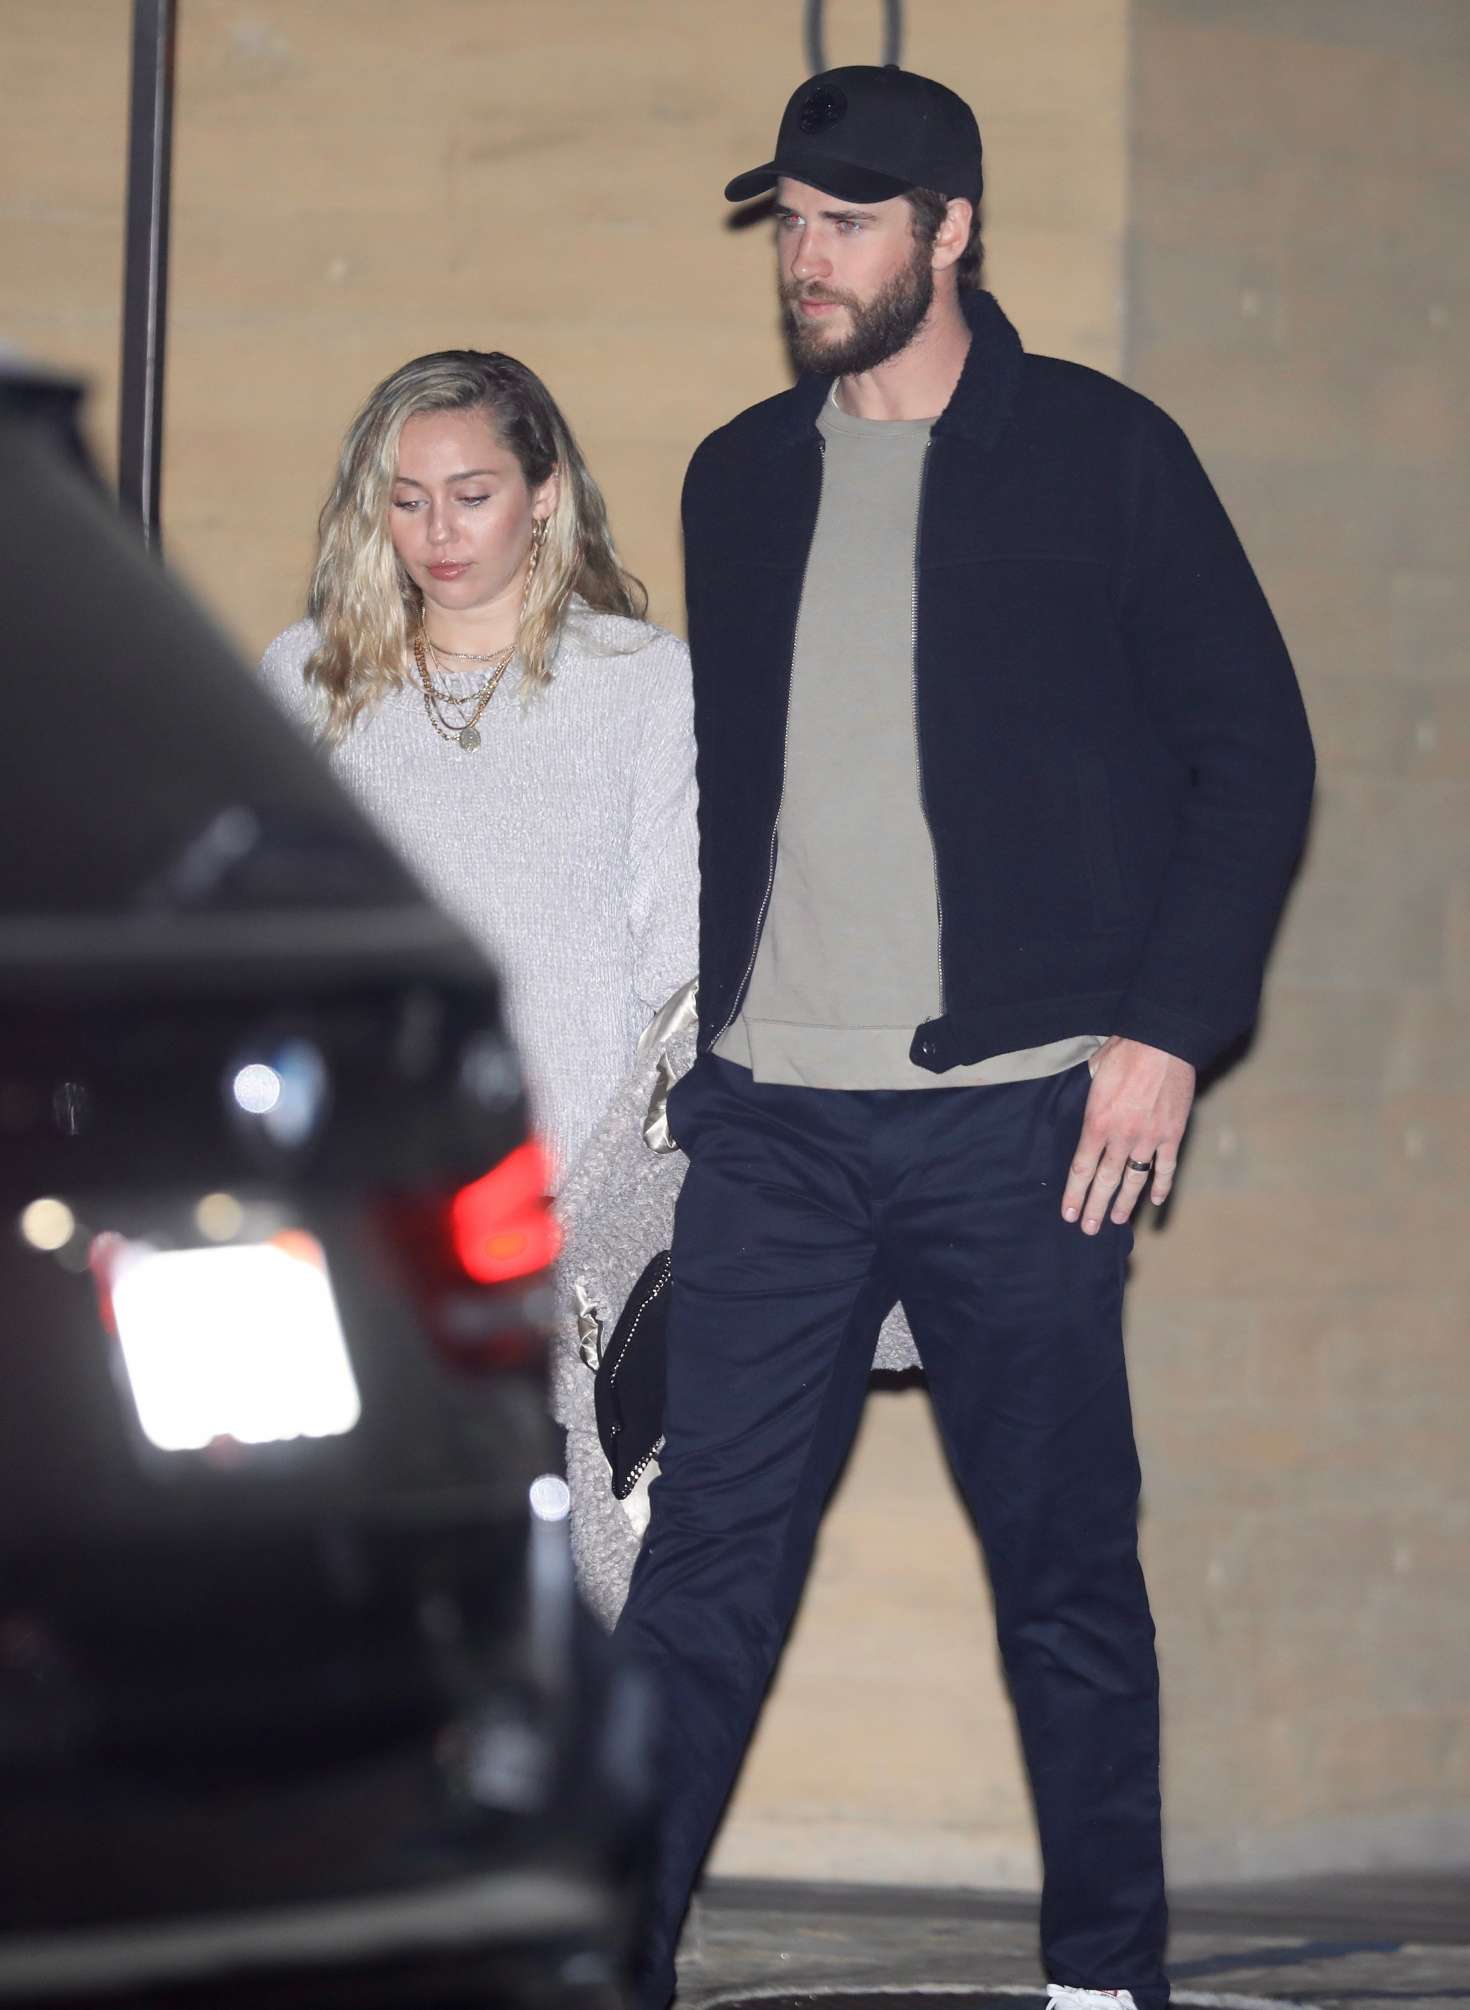 Miley Cyrus and Liam Hemsworth - Night out in LA